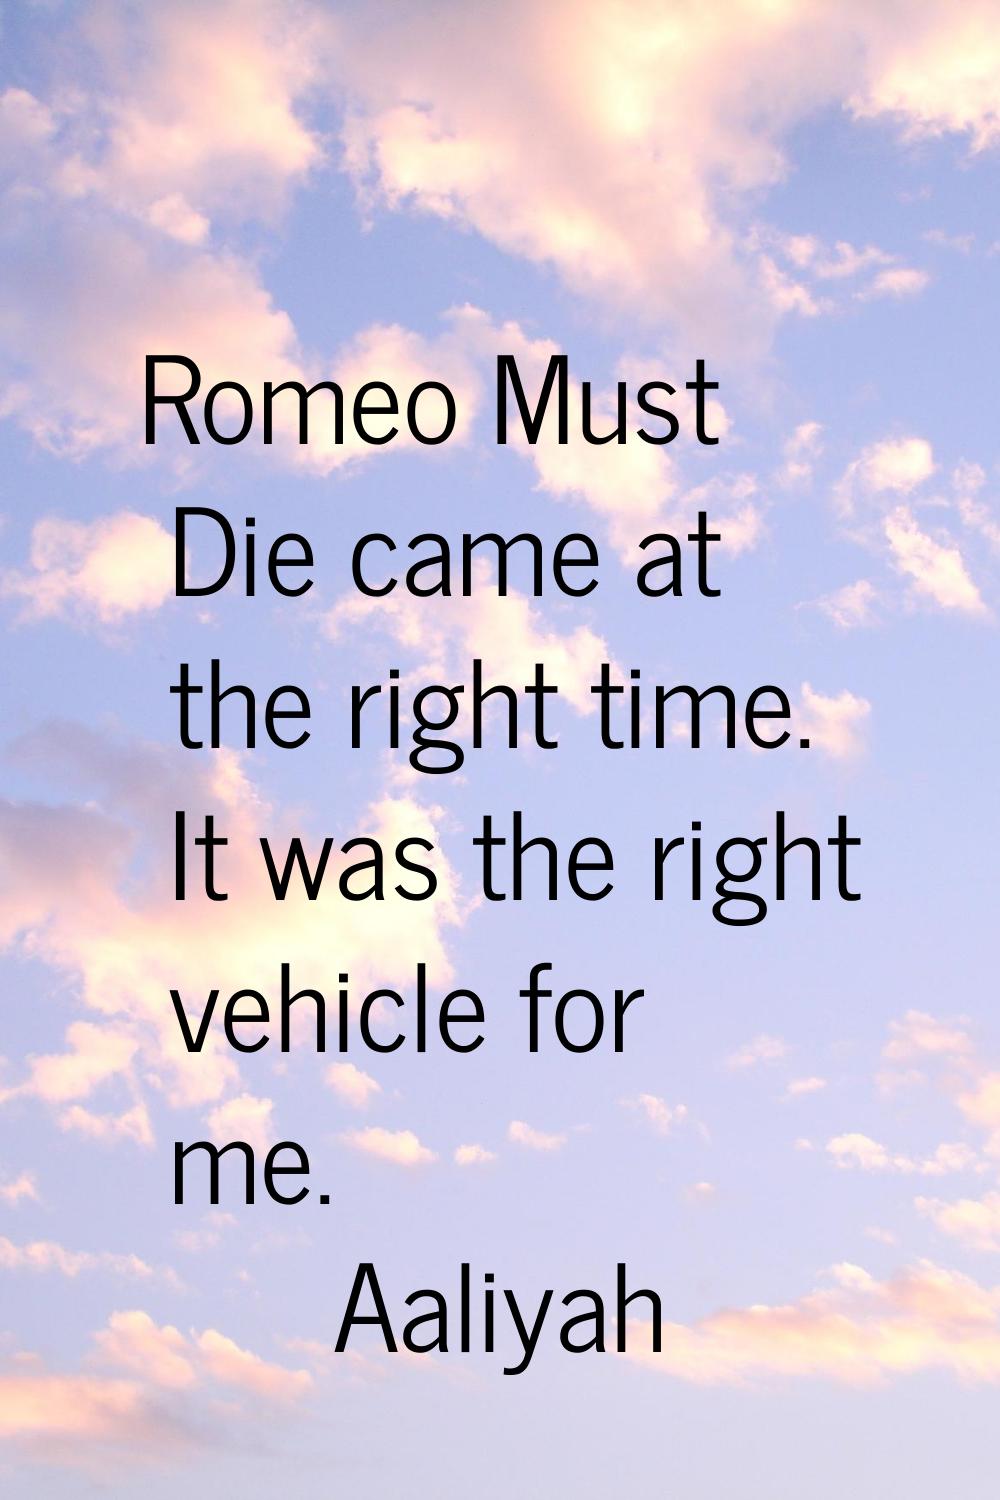 Romeo Must Die came at the right time. It was the right vehicle for me.